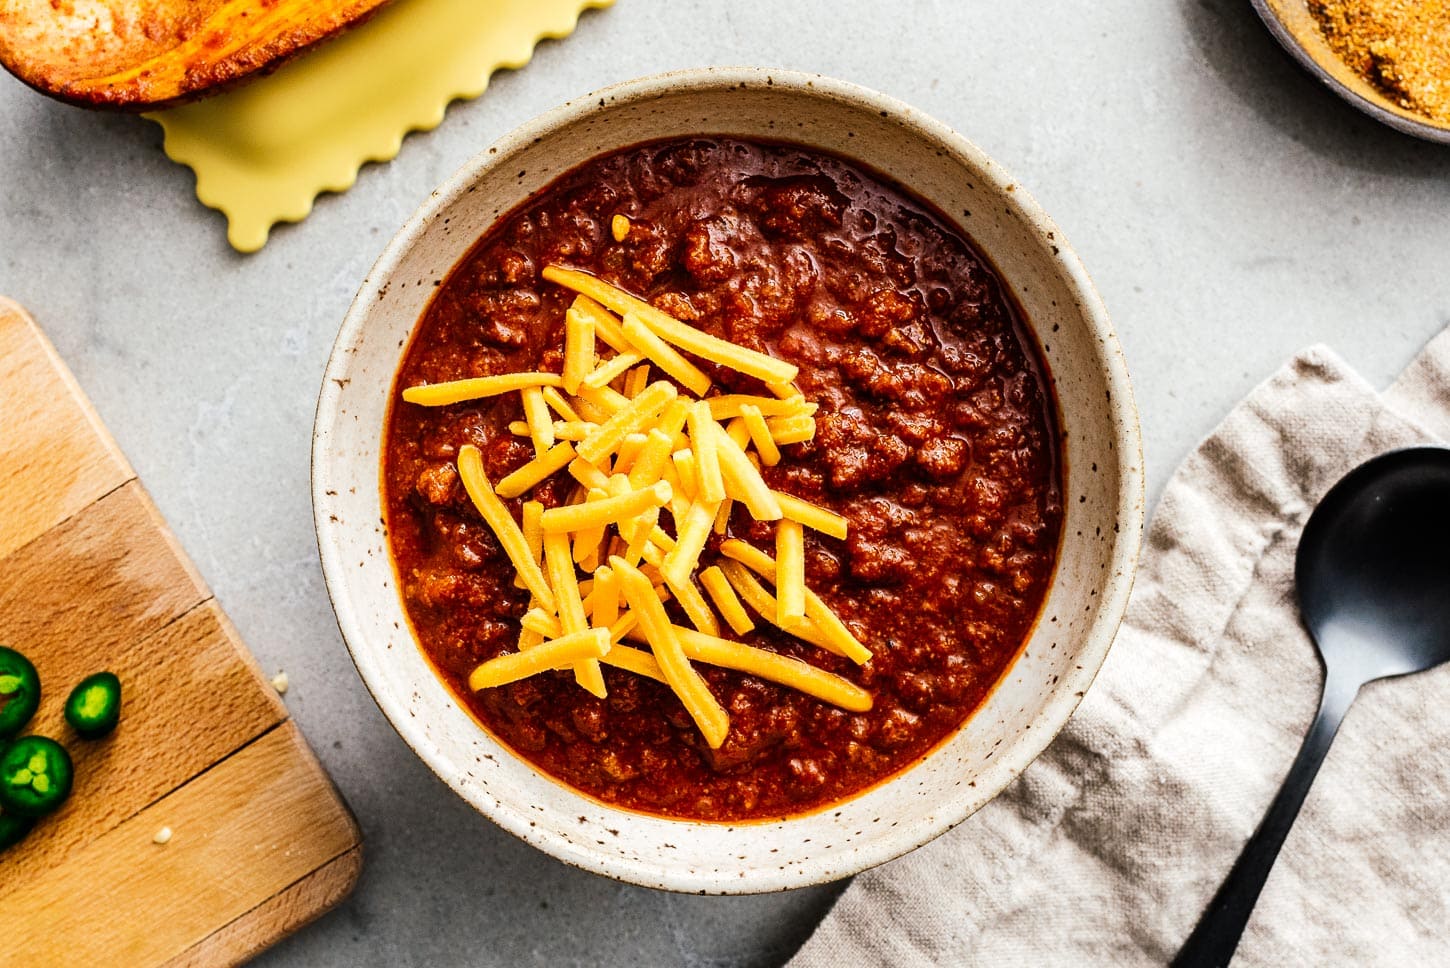 chili topped with cheddar cheese | sharefavoritefood.com